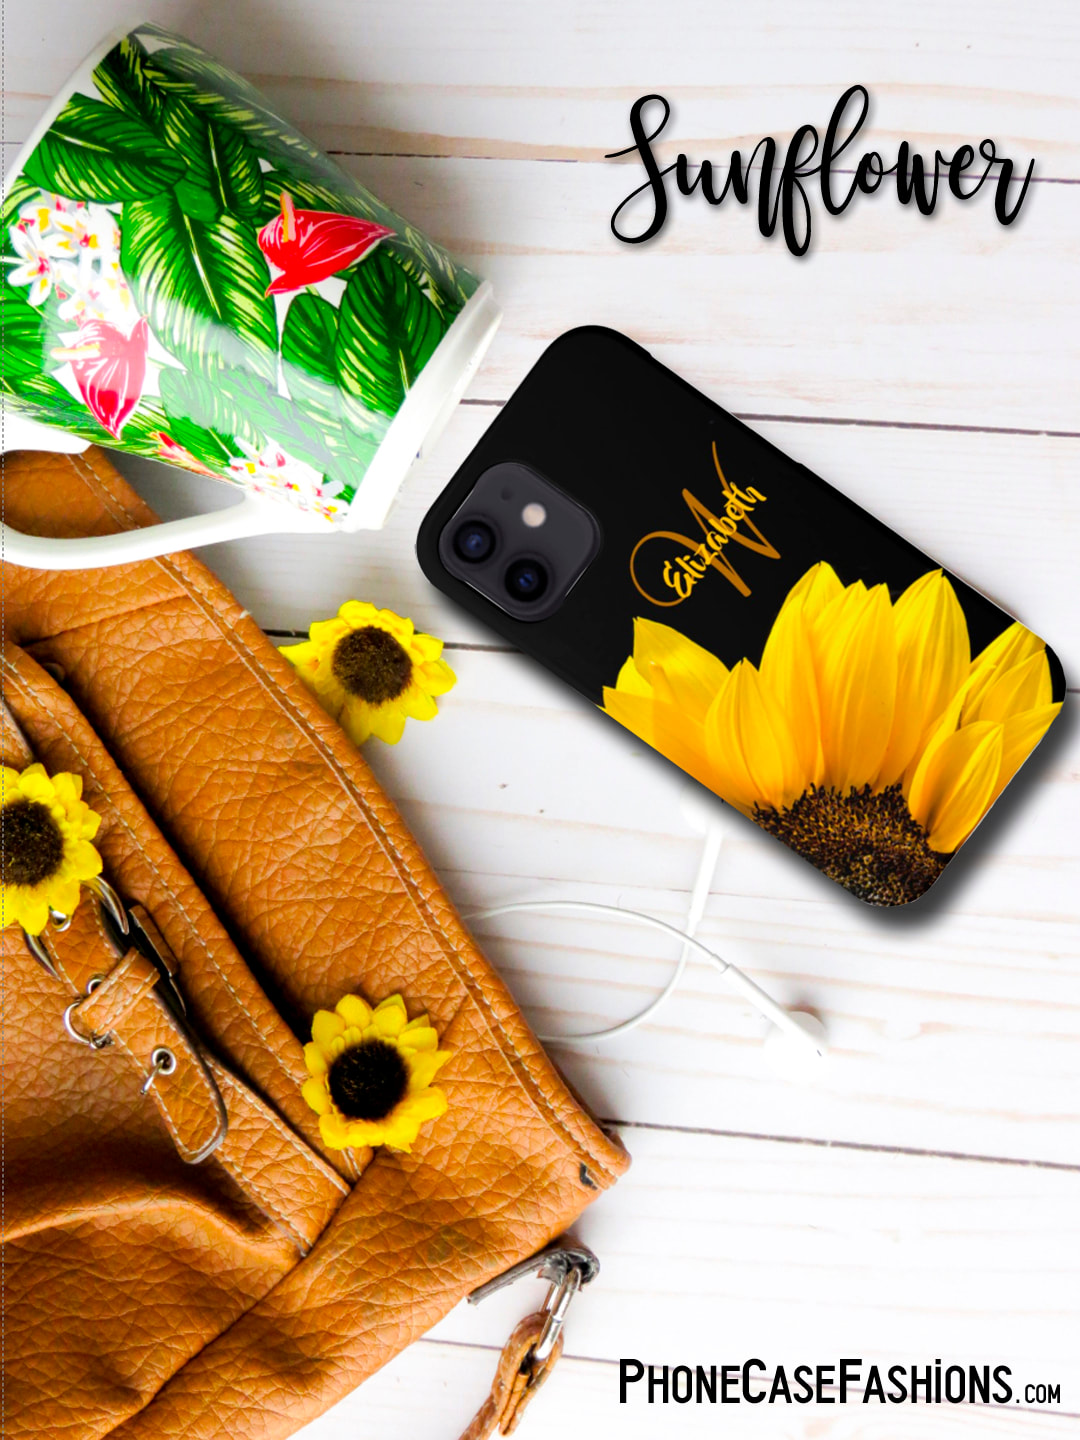 Yellow sunflower on a black background is a beautiful pop of color for your black-on-black outfits, all white, khaki or highlight a yellow or floral print favorite. Don't hide behind an ugly phone case! Shop PhoneCaseFashions.com